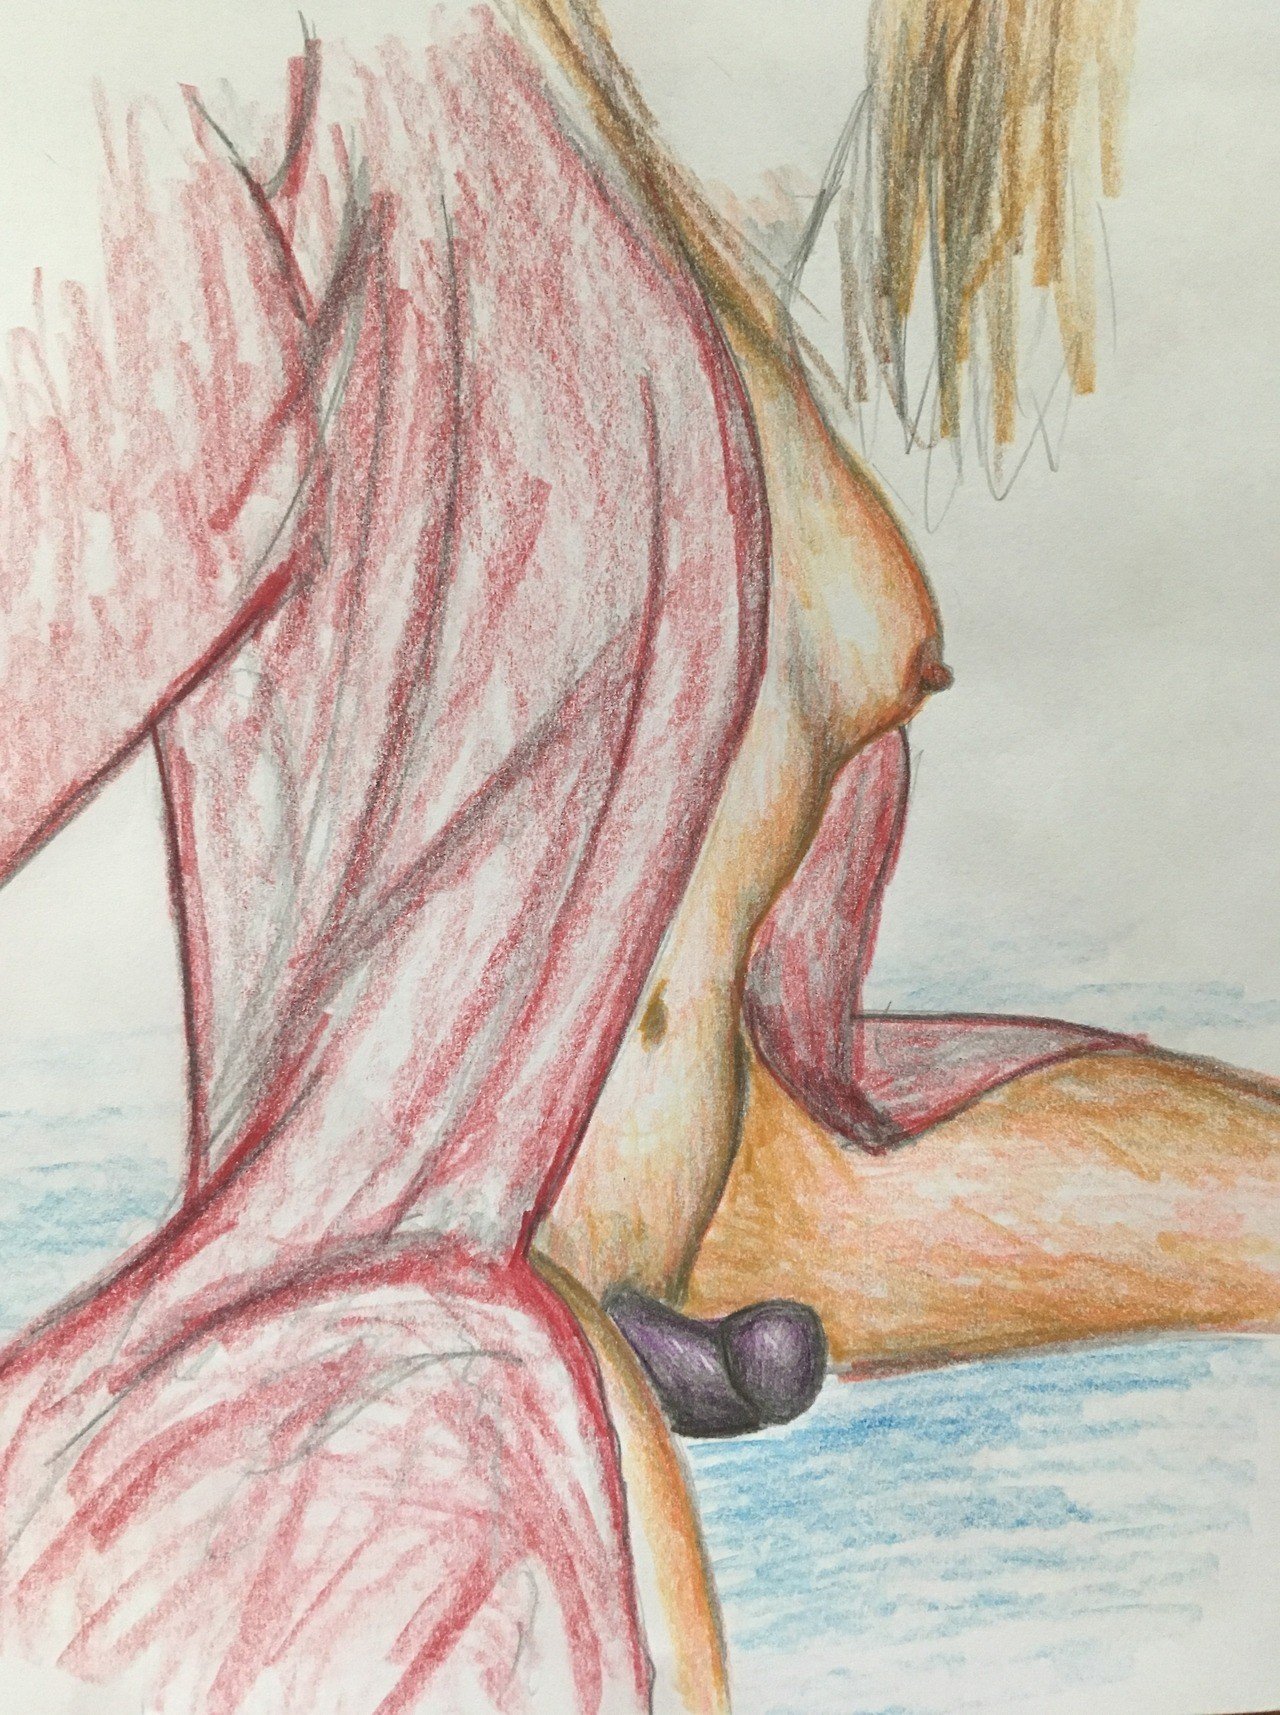 Photo by Brí with the username @TheEroticArtistBri, who is a verified user,  August 7, 2019 at 5:10 PM. The post is about the topic Artistic Perversion and the text says 'Art by me, the Erotic Artist: Brí'